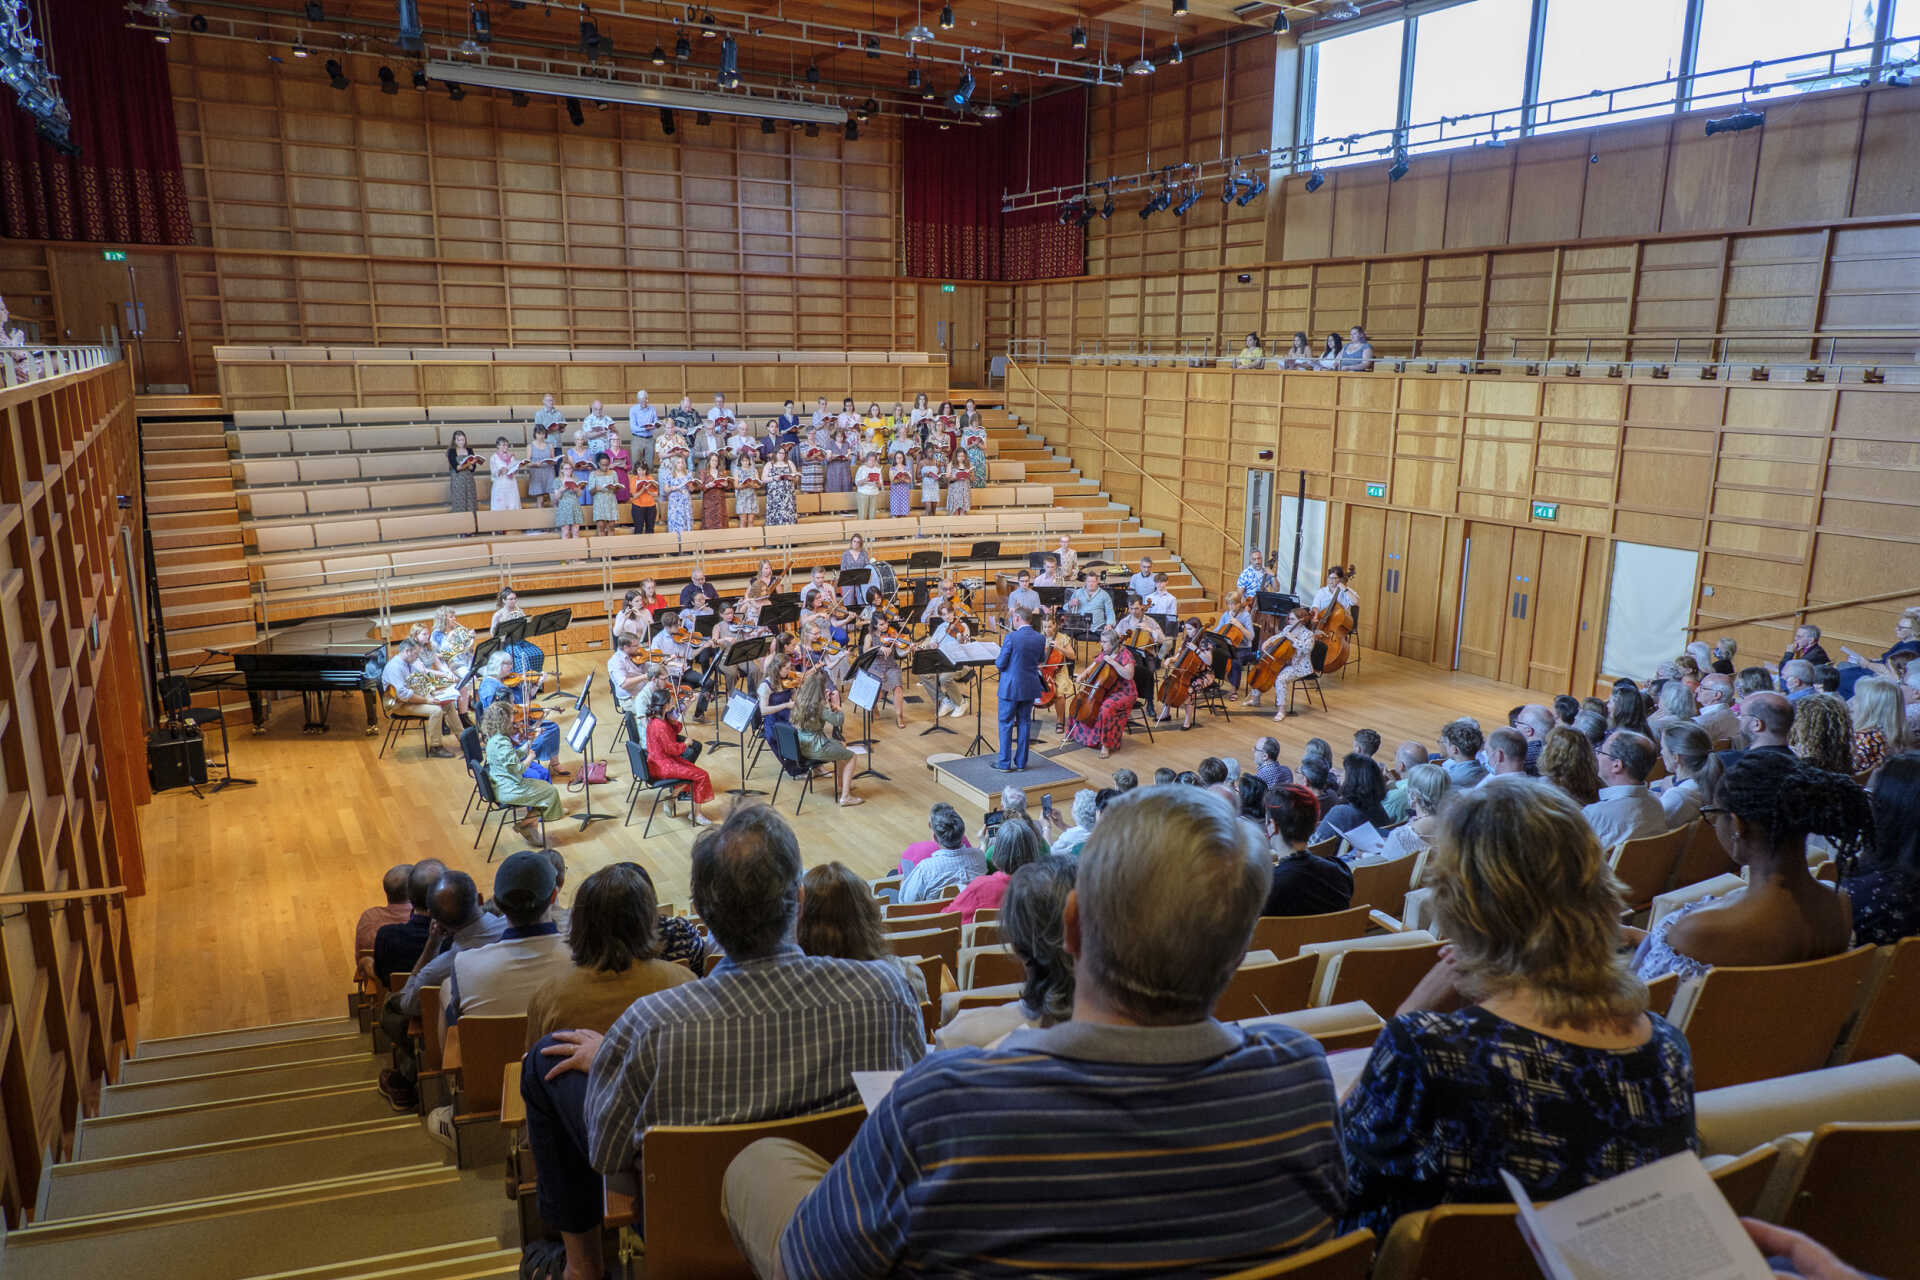 Performers and audience in the concert-hall